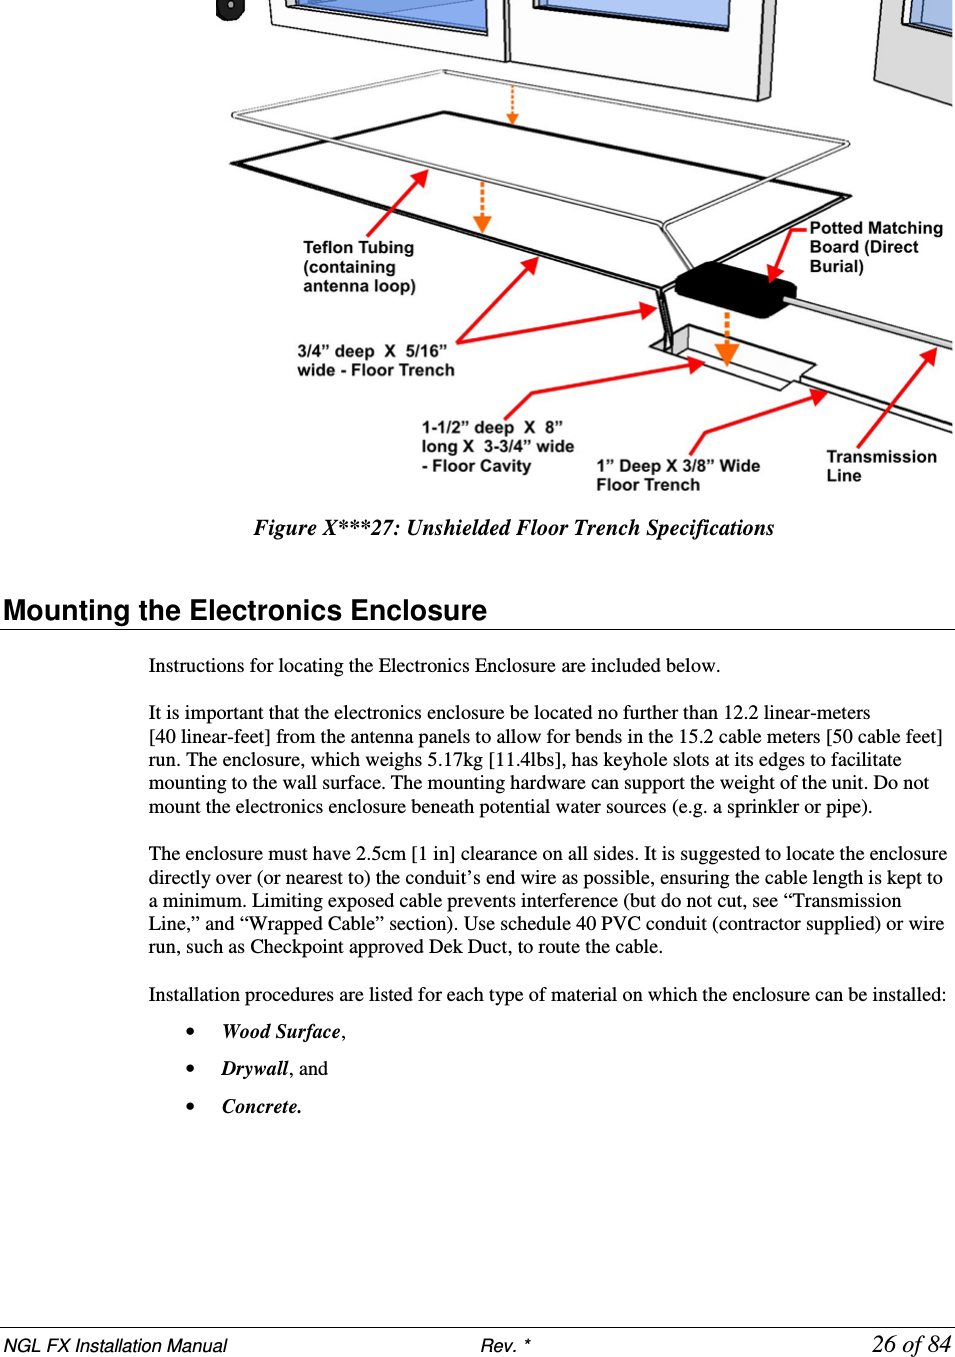 NGL FX Installation Manual                           Rev. *            26 of 84   Figure X***27: Unshielded Floor Trench Specifications  Mounting the Electronics Enclosure Instructions for locating the Electronics Enclosure are included below. It is important that the electronics enclosure be located no further than 12.2 linear-meters [40 linear-feet] from the antenna panels to allow for bends in the 15.2 cable meters [50 cable feet] run. The enclosure, which weighs 5.17kg [11.4lbs], has keyhole slots at its edges to facilitate mounting to the wall surface. The mounting hardware can support the weight of the unit. Do not mount the electronics enclosure beneath potential water sources (e.g. a sprinkler or pipe).  The enclosure must have 2.5cm [1 in] clearance on all sides. It is suggested to locate the enclosure directly over (or nearest to) the conduit’s end wire as possible, ensuring the cable length is kept to a minimum. Limiting exposed cable prevents interference (but do not cut, see “Transmission Line,” and “Wrapped Cable” section). Use schedule 40 PVC conduit (contractor supplied) or wire run, such as Checkpoint approved Dek Duct, to route the cable. Installation procedures are listed for each type of material on which the enclosure can be installed:  • Wood Surface,  • Drywall, and  • Concrete.   